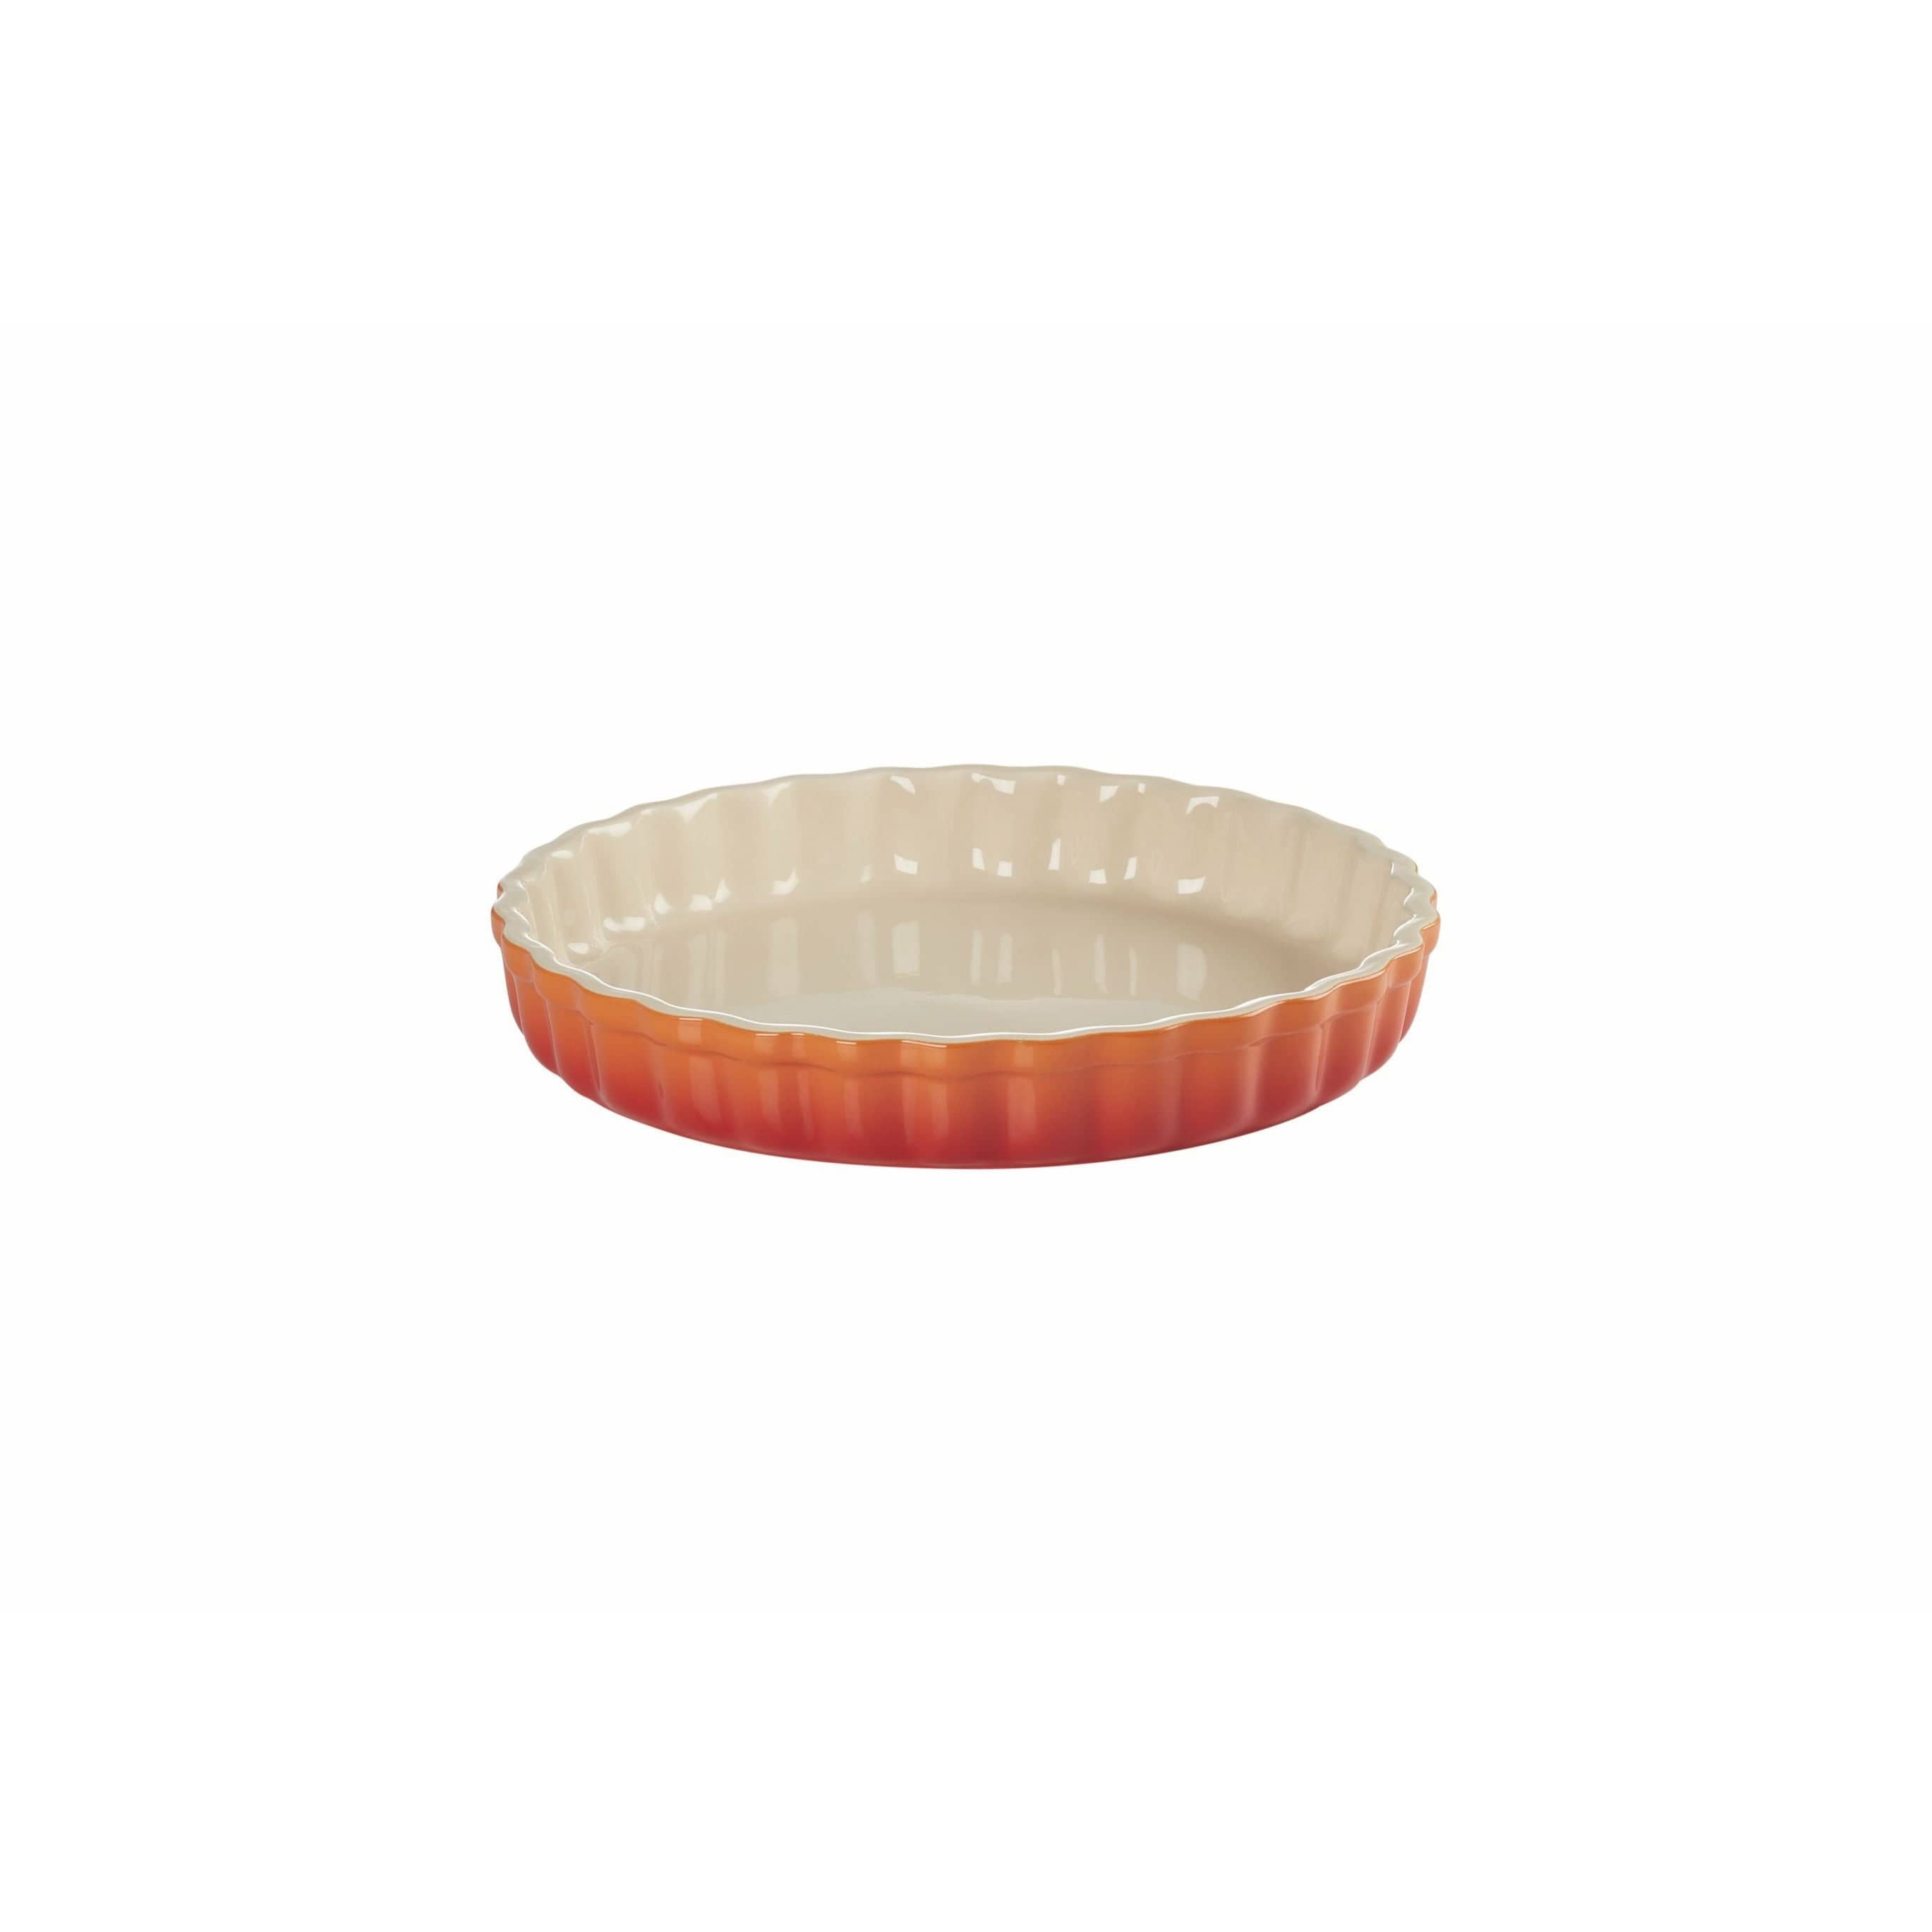 Le Creuset Heritage cake tin 24 cm, oven rood